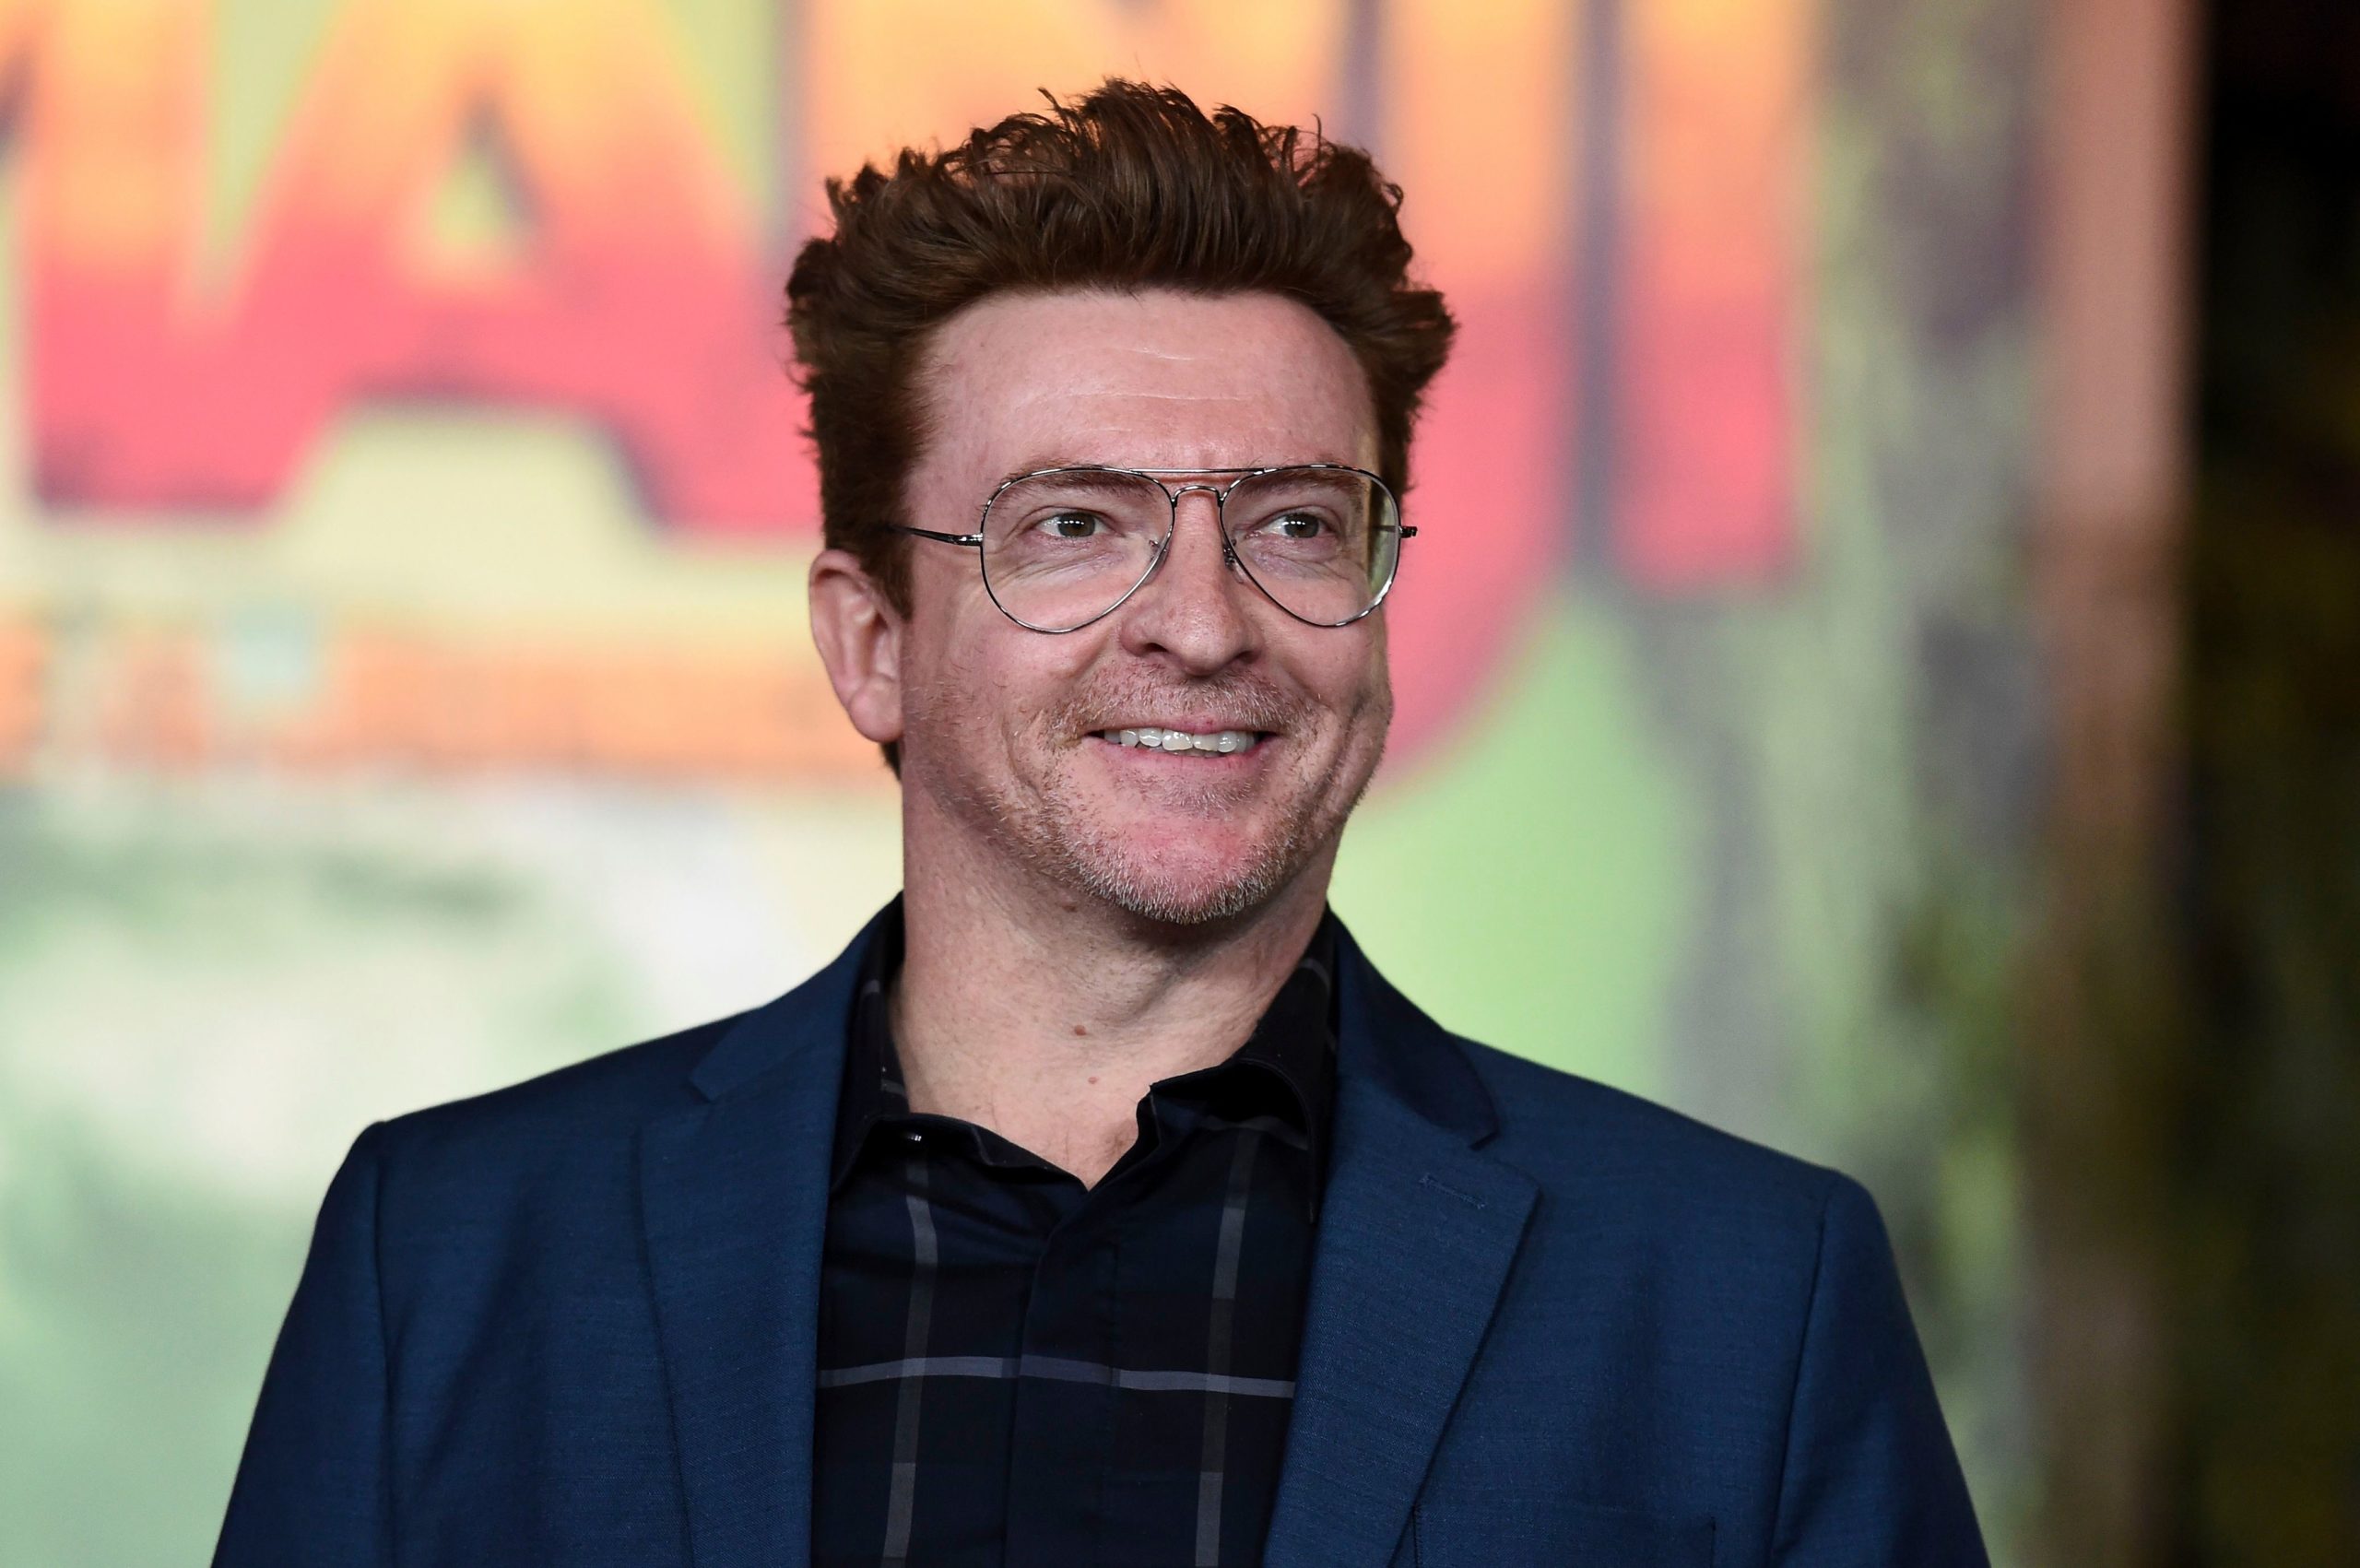 Rhys Darby will play the role of Stede Bonnet